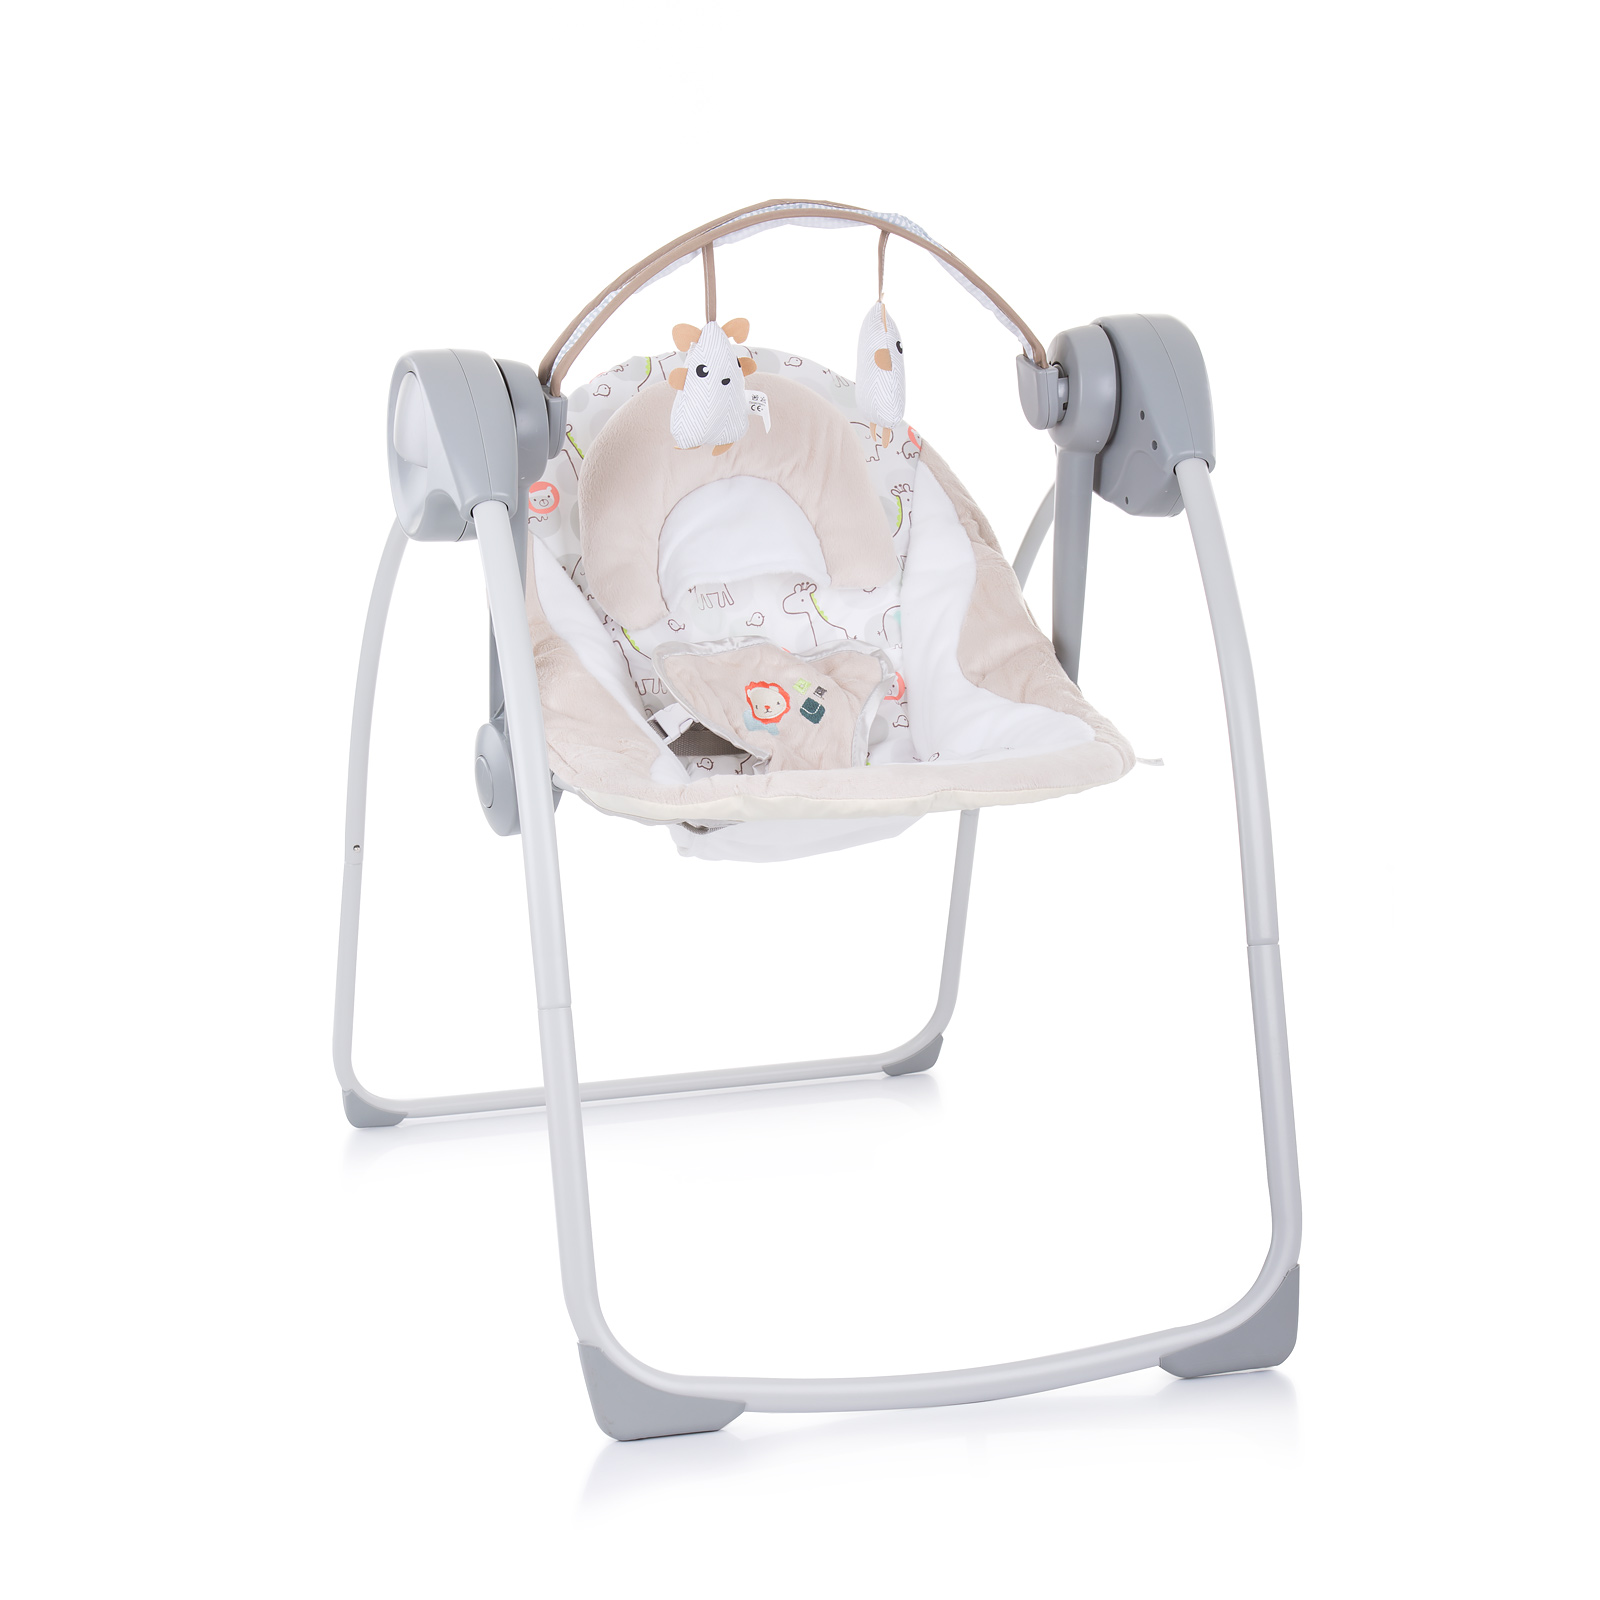 Electric Baby Swing “Felicity” – Lion